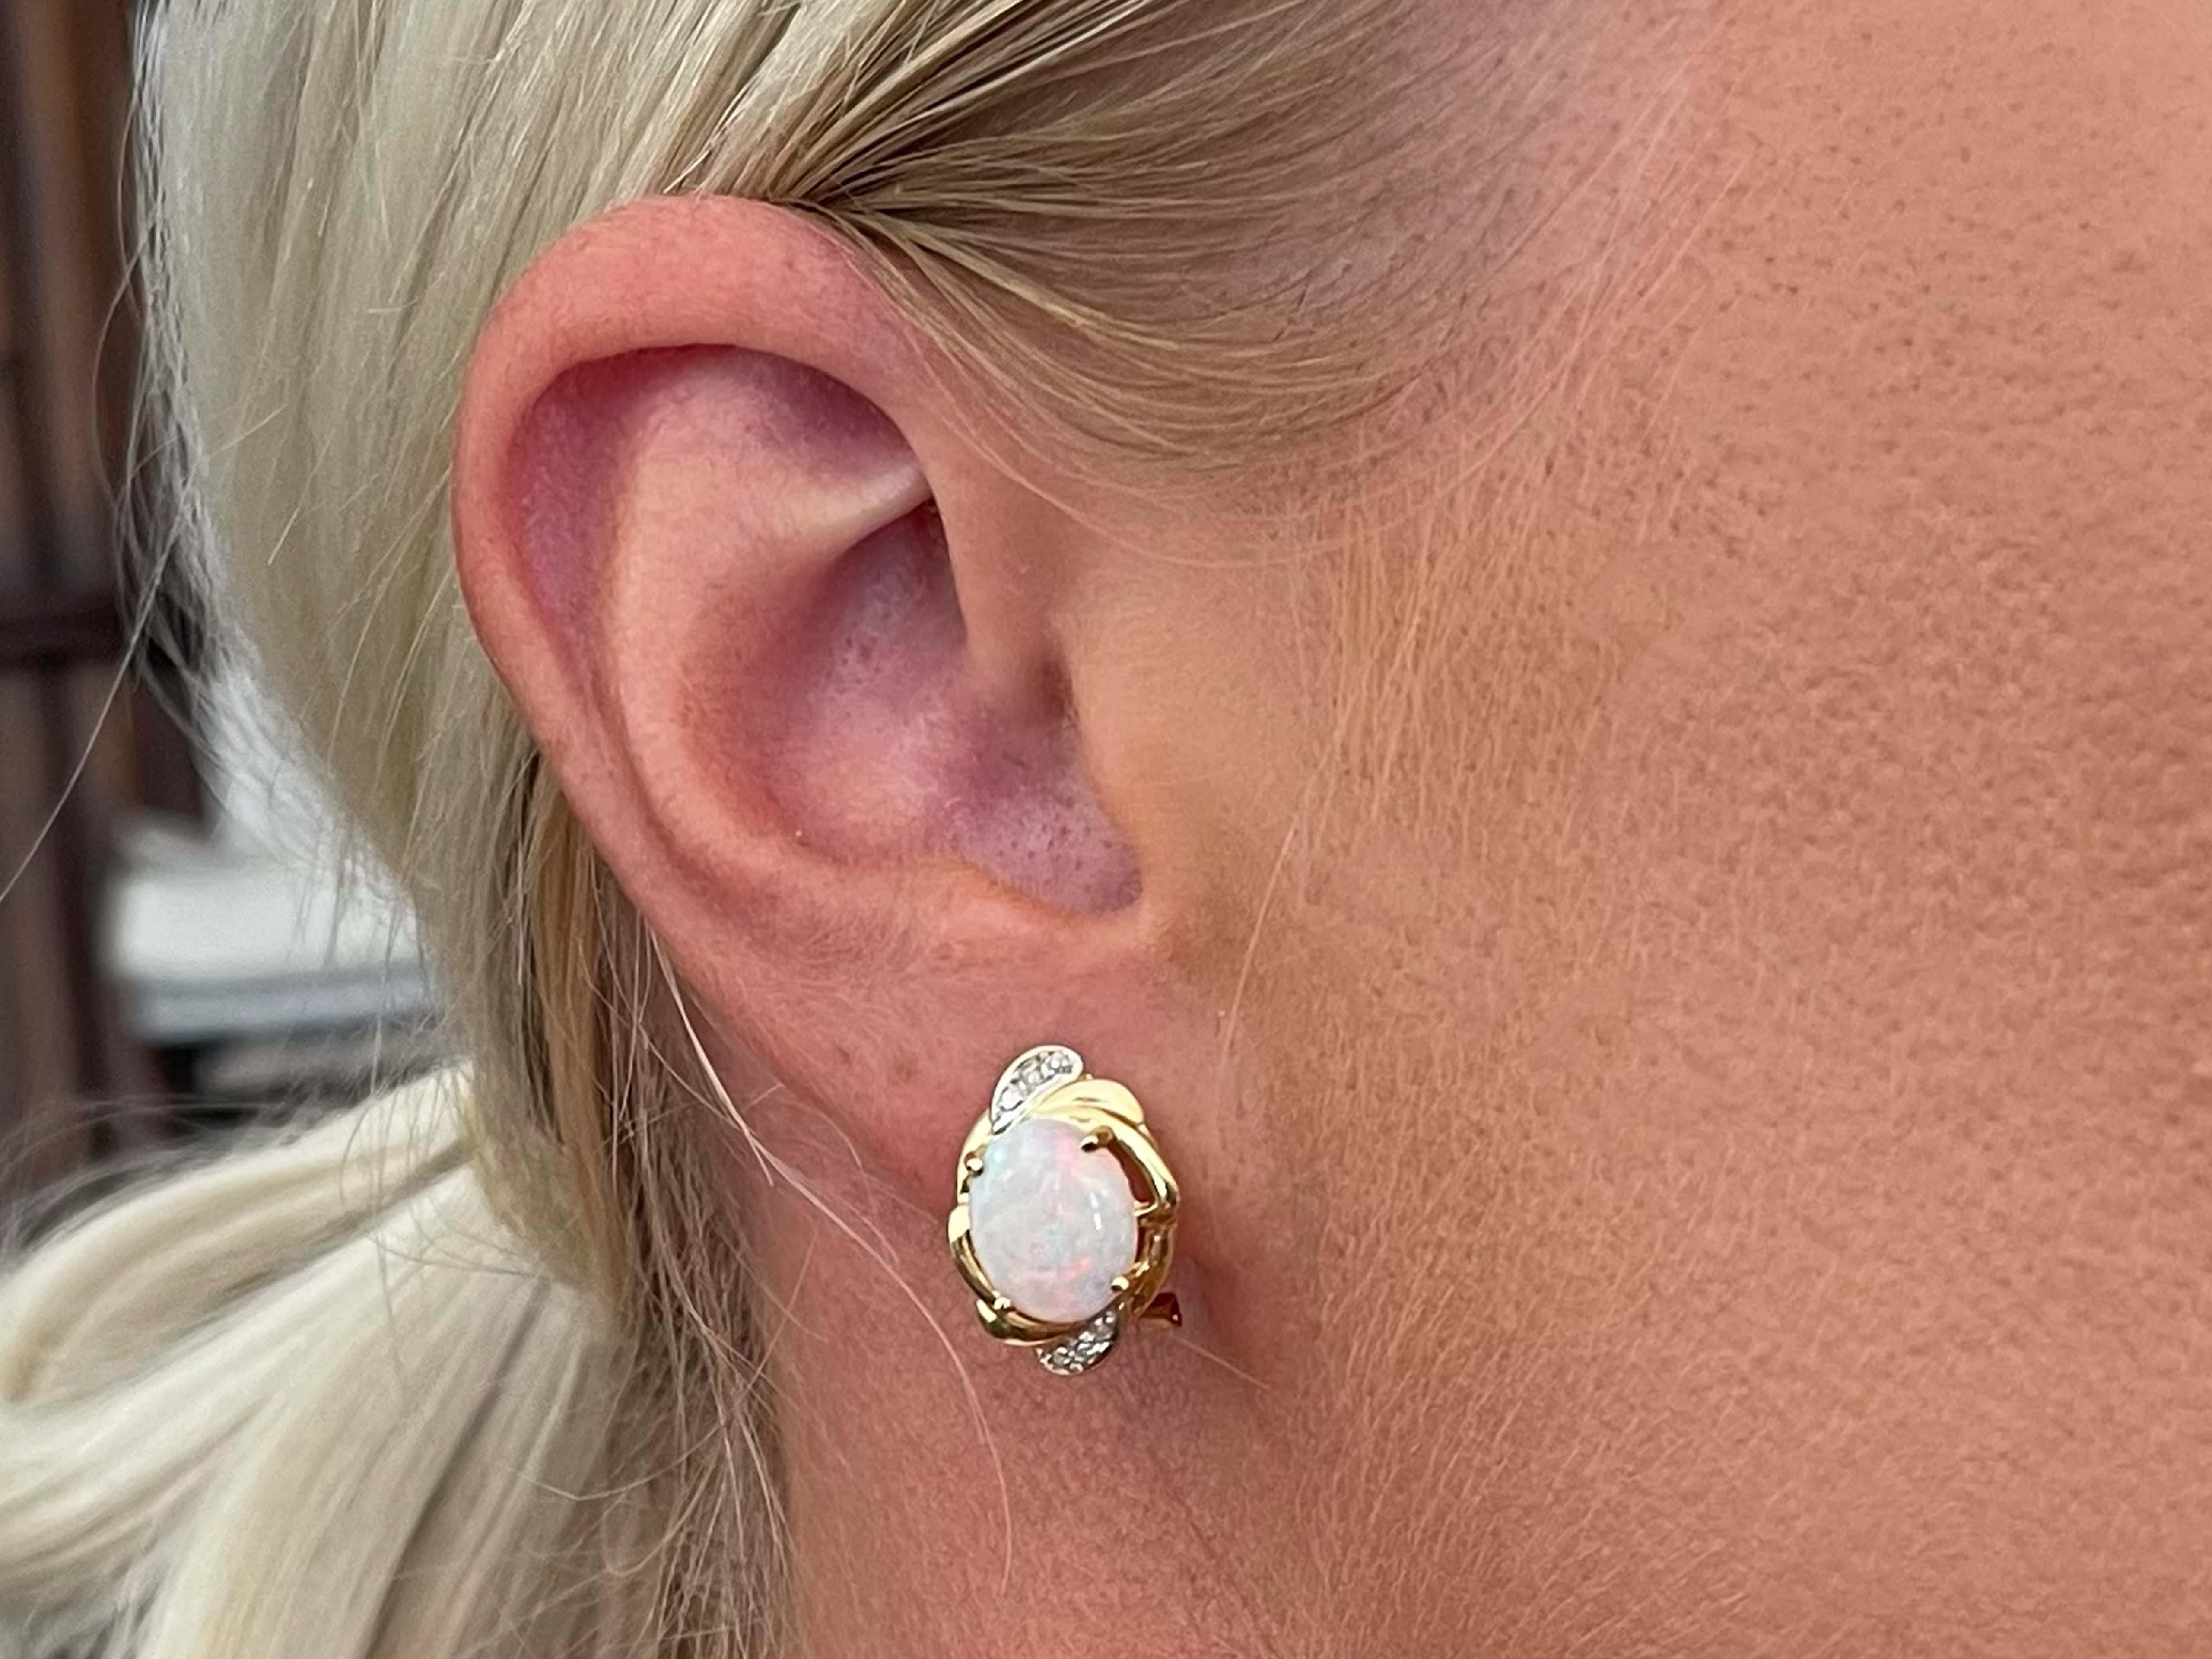 Earrings Specifications:

Metal: 14k Yellow Gold

Earring Length: 16.5 mm 

Total Weight: 4.3 Grams

Opal: 2

Opal Total Carat Weight: 1.64 carats

Diamonds: 12

Diamond Color: I

Diamond Clarity: I1

Diamond Carat Weight: 0.06 carats

Condition: